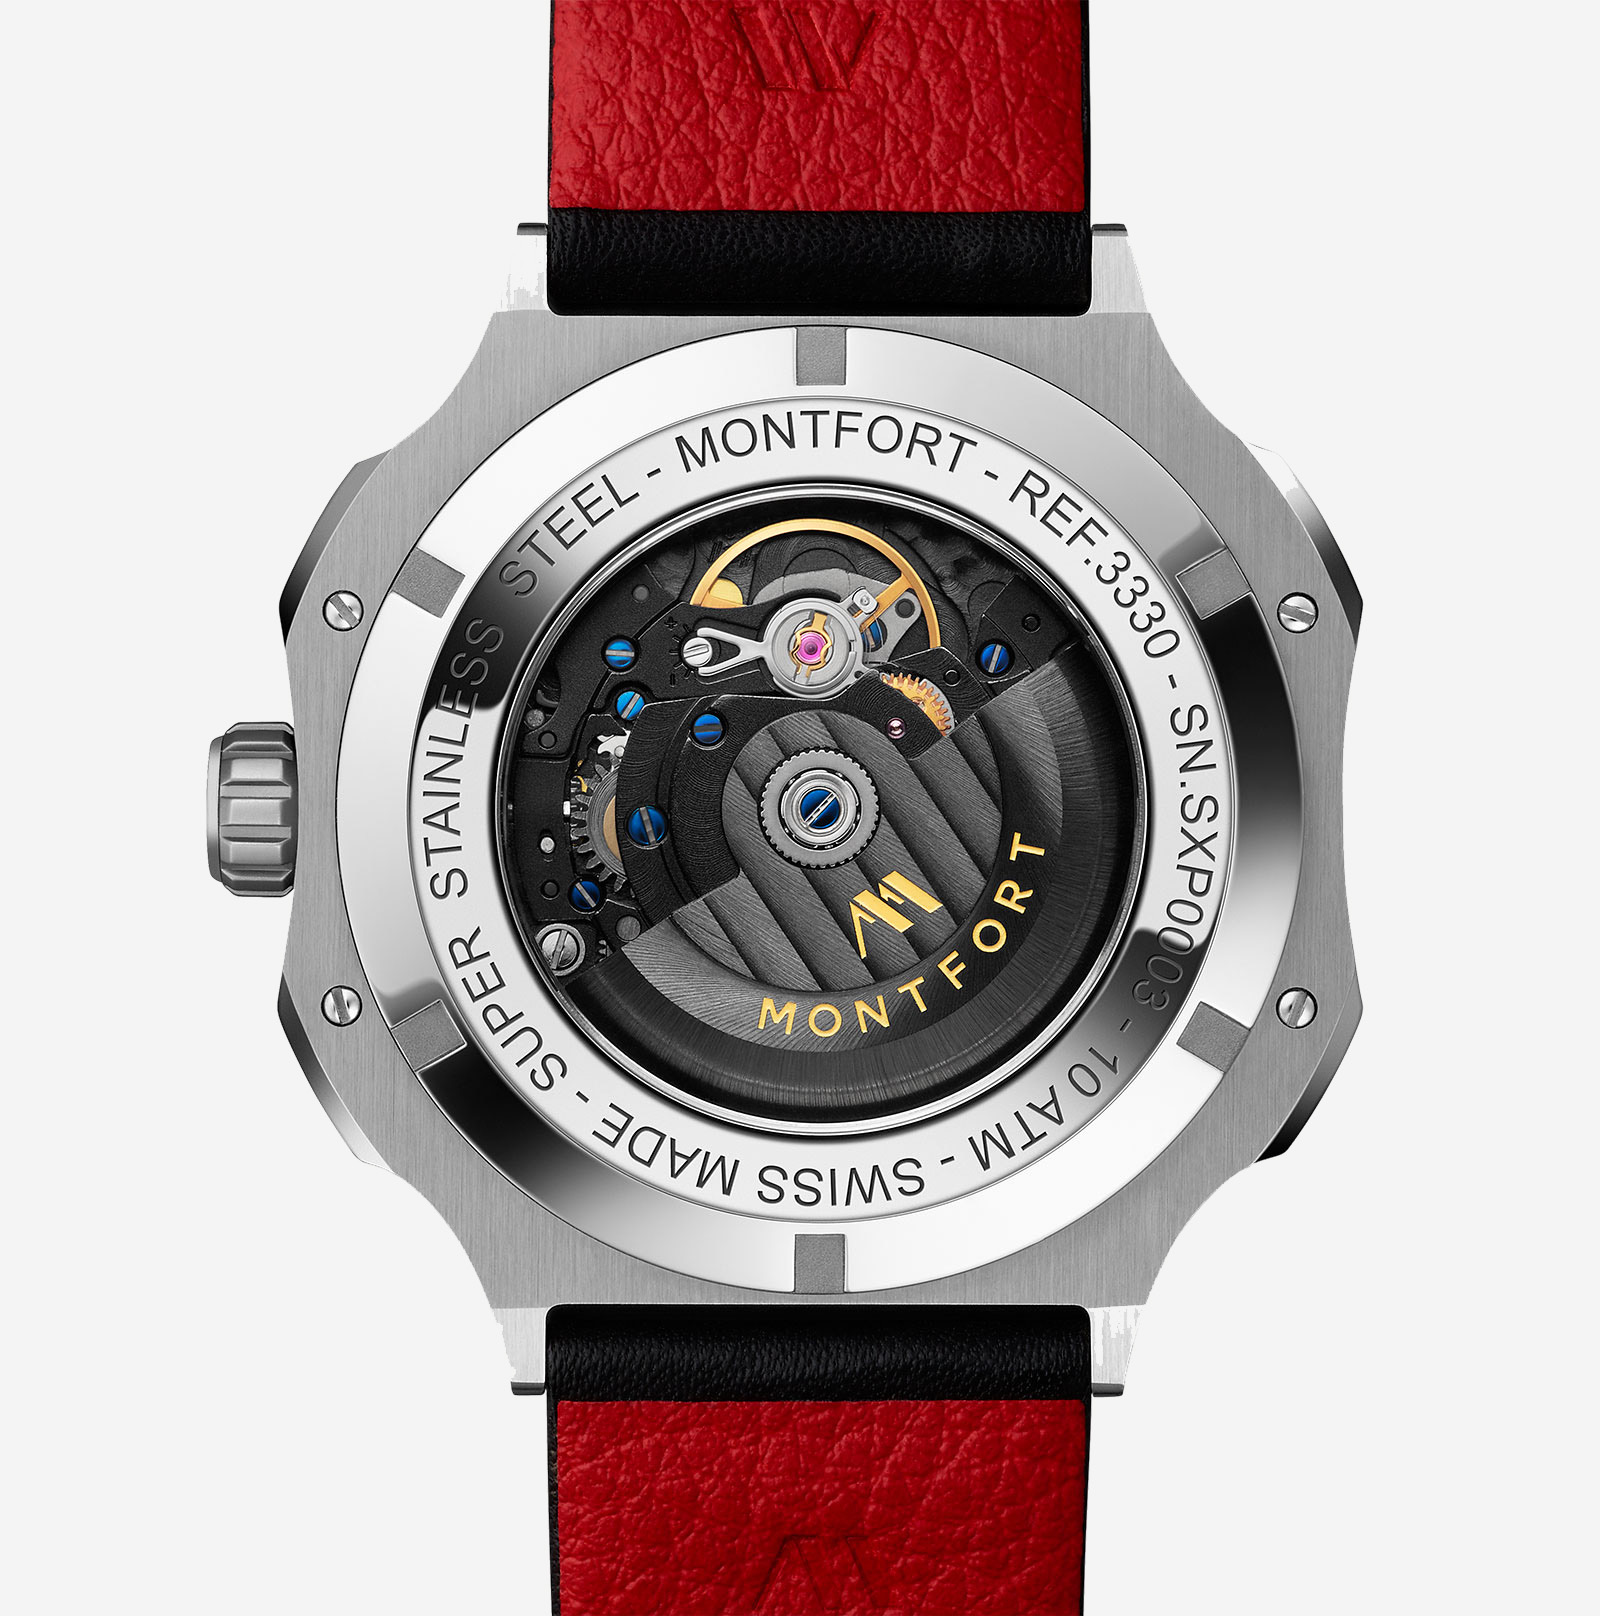 Montfront Strata watch 3D printed dial 5a